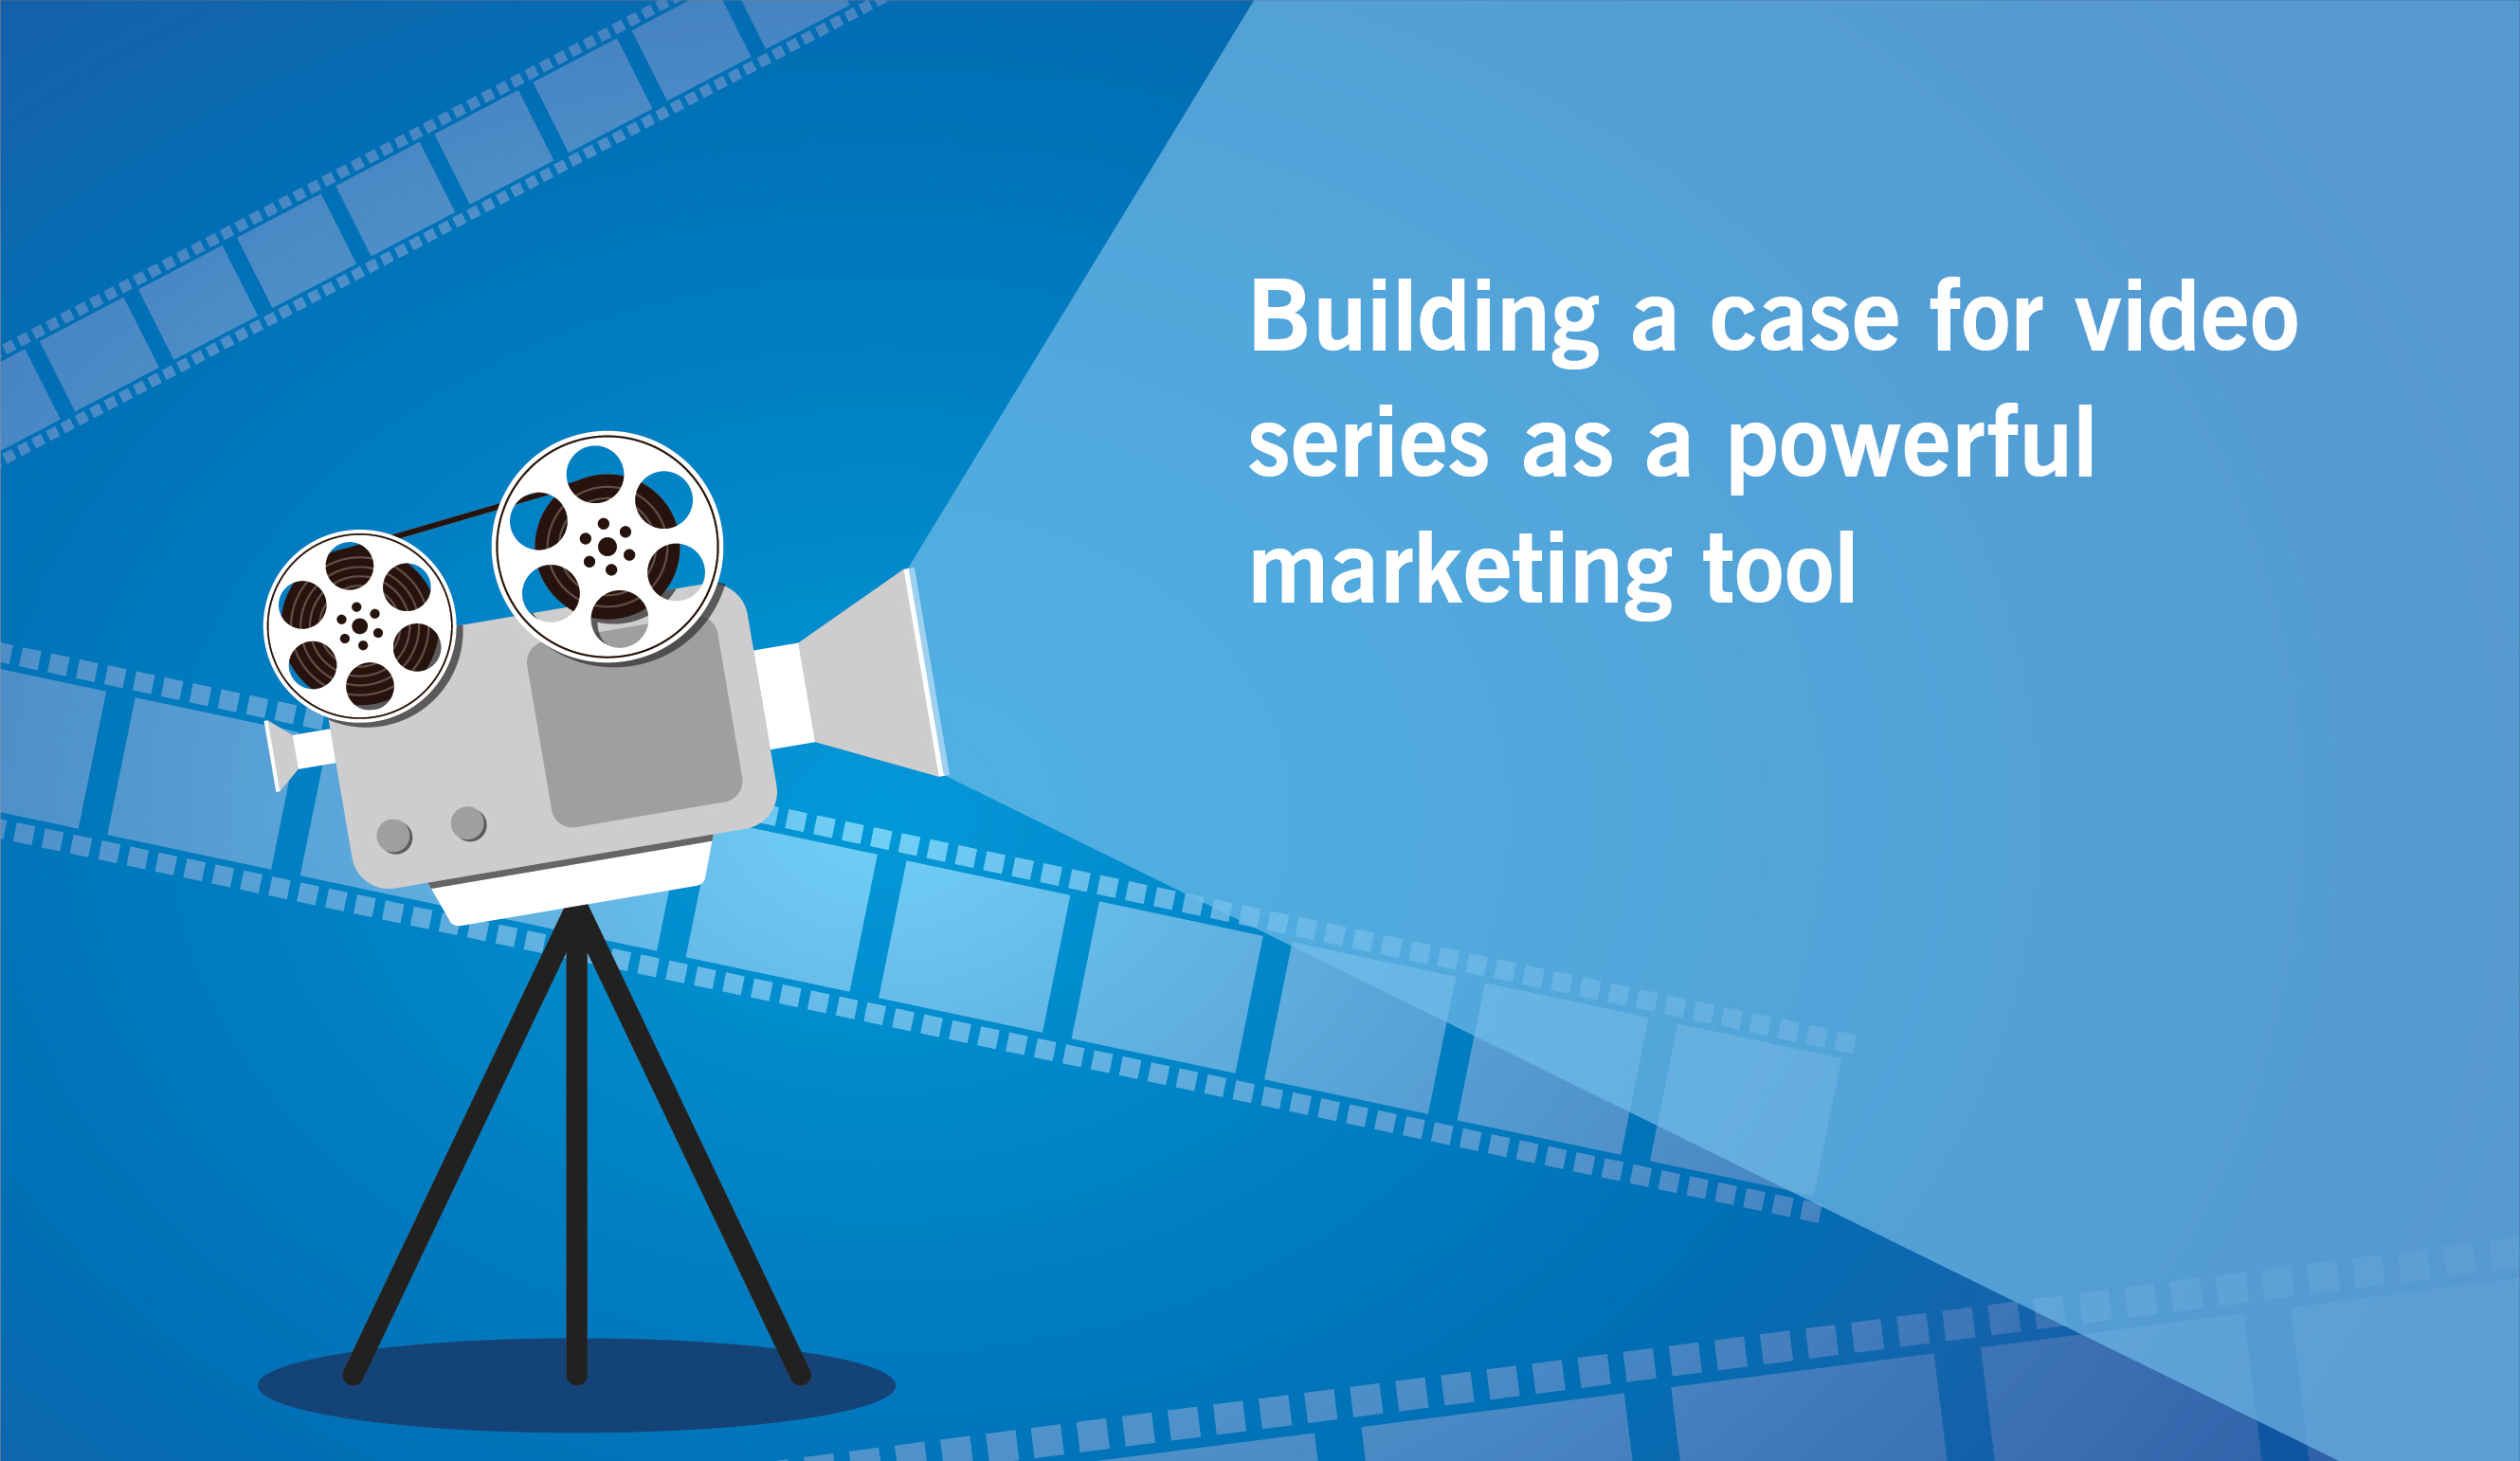 Building a case for video series as a powerful marketing tool